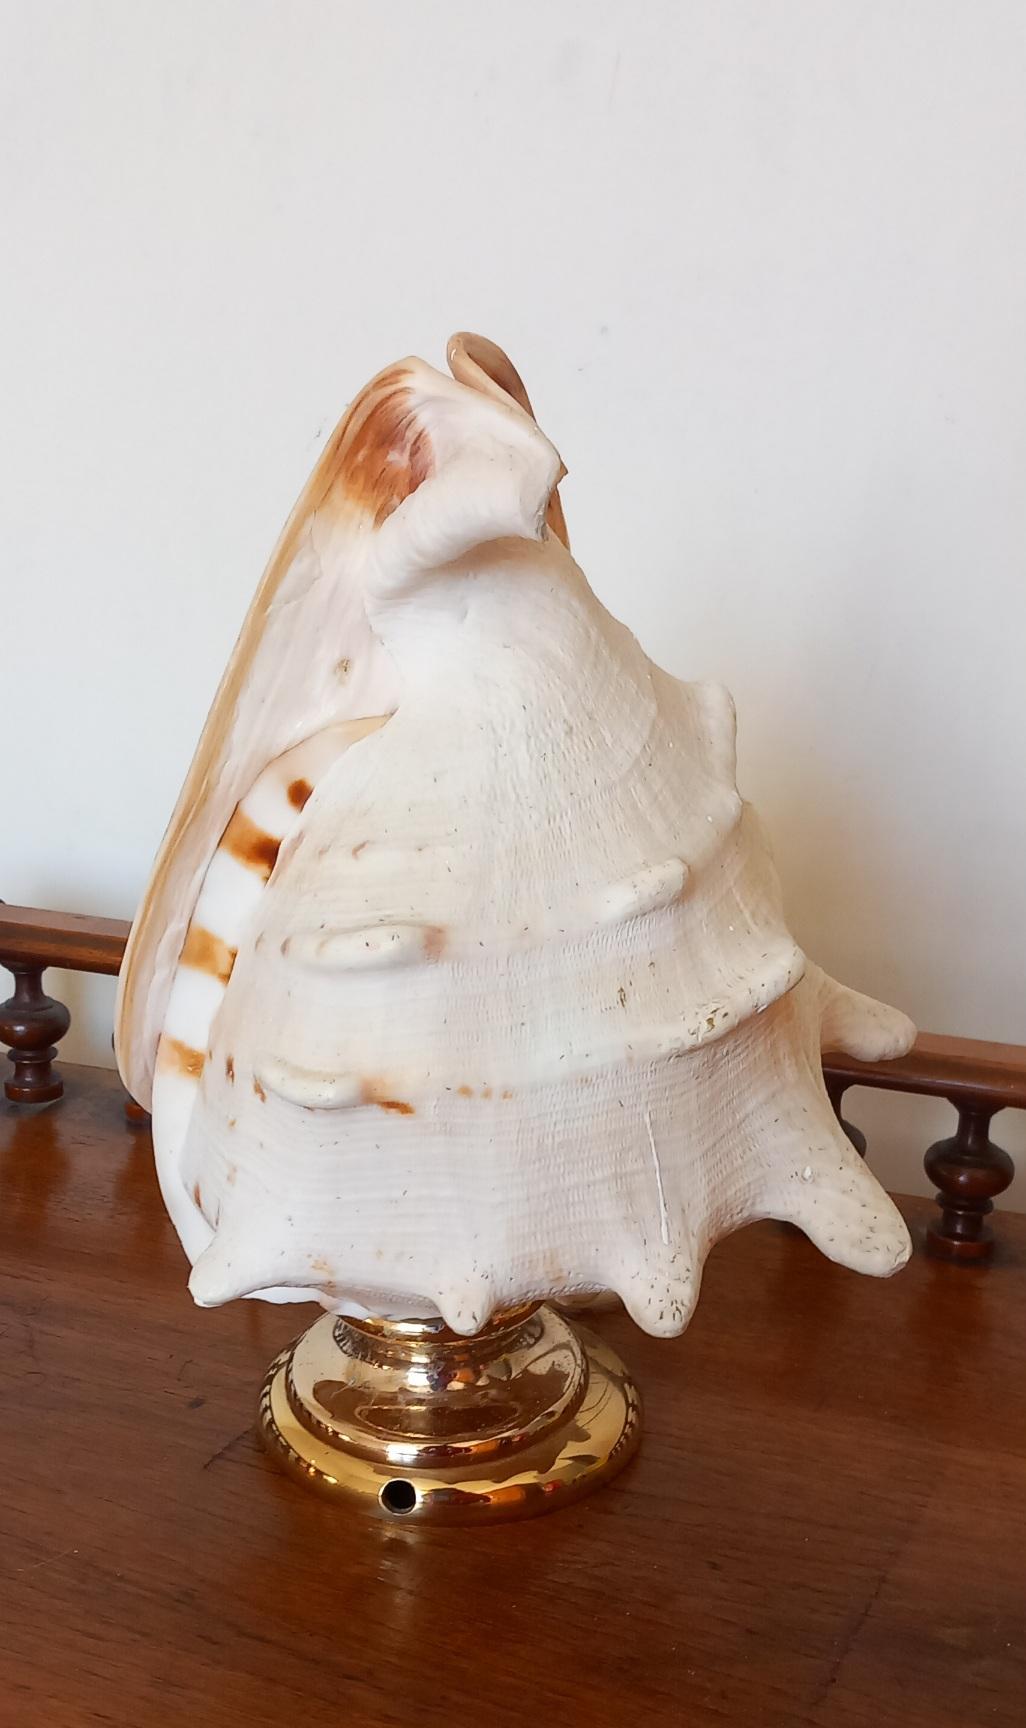 Other Big Clam Shell Natural Specimen  With Brass Pedestal. Iluminated For Sale